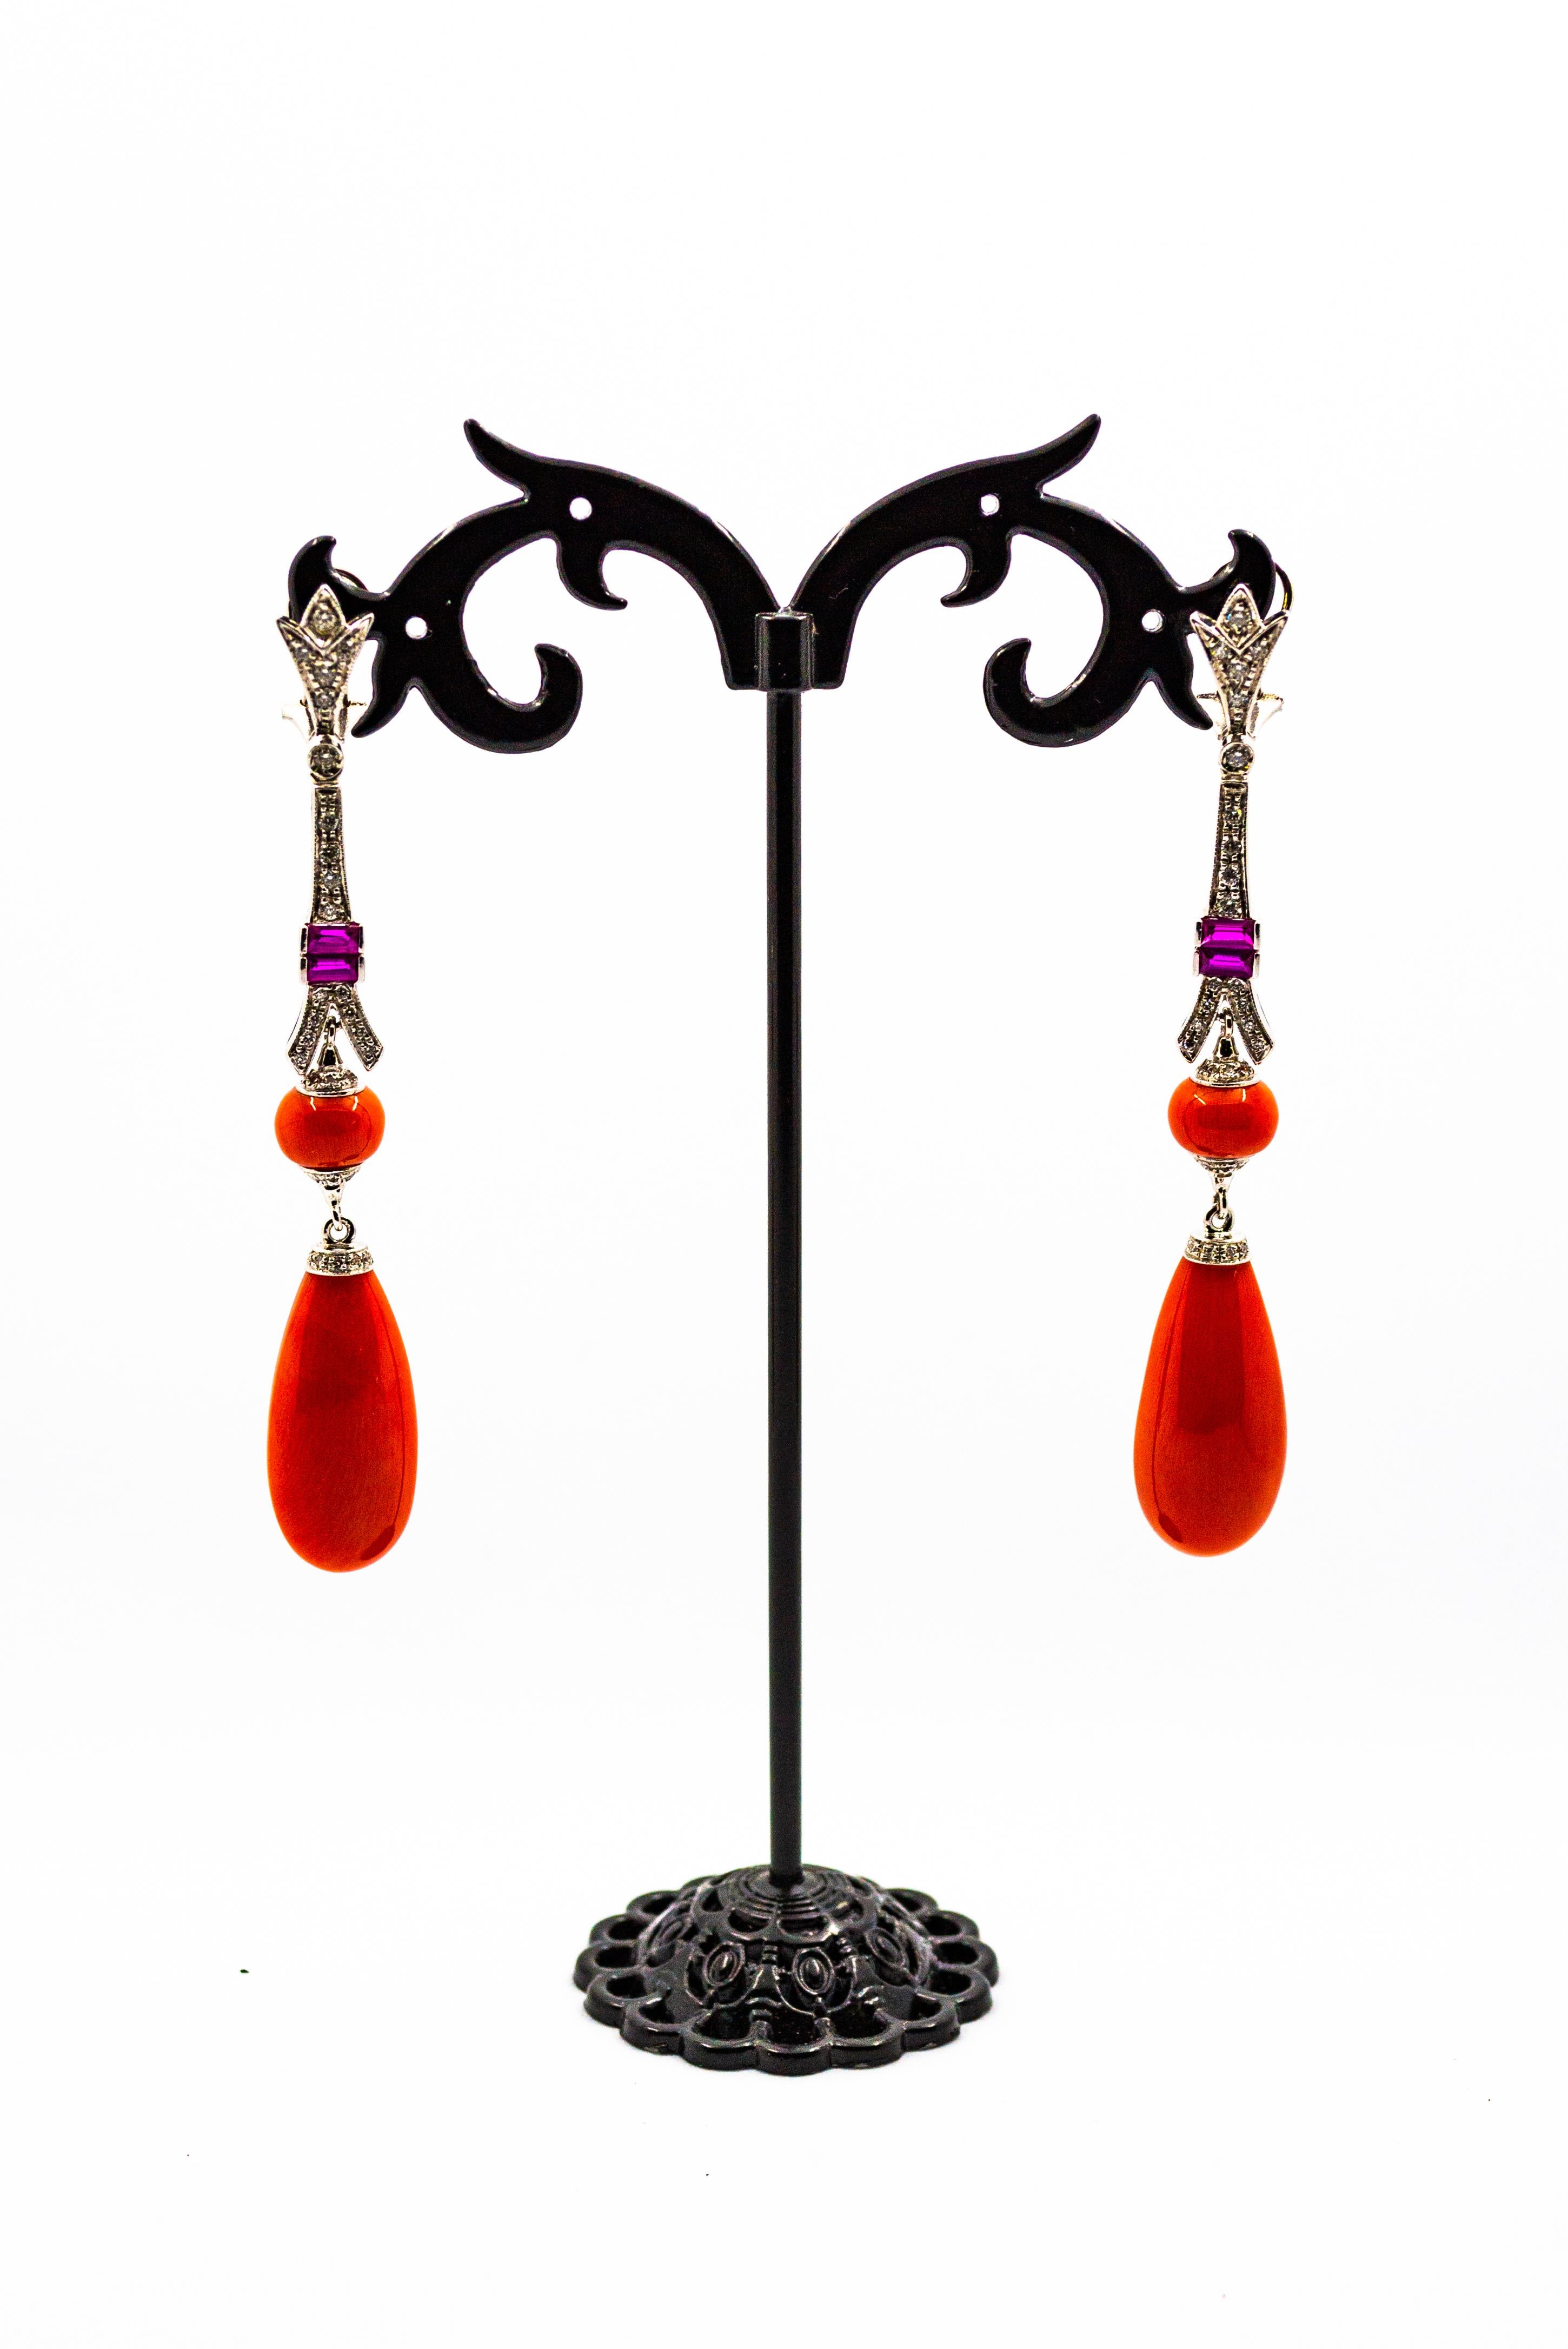 These Clip-On Earrings are made of 9K White Gold.
These Earrings have 0.90 Carats of White Diamonds.
These Earrings have Mediterranean (Sardinia, Italy) Red Coral and Amethyst.
All our Earrings have pins for pierced ears but we can change the